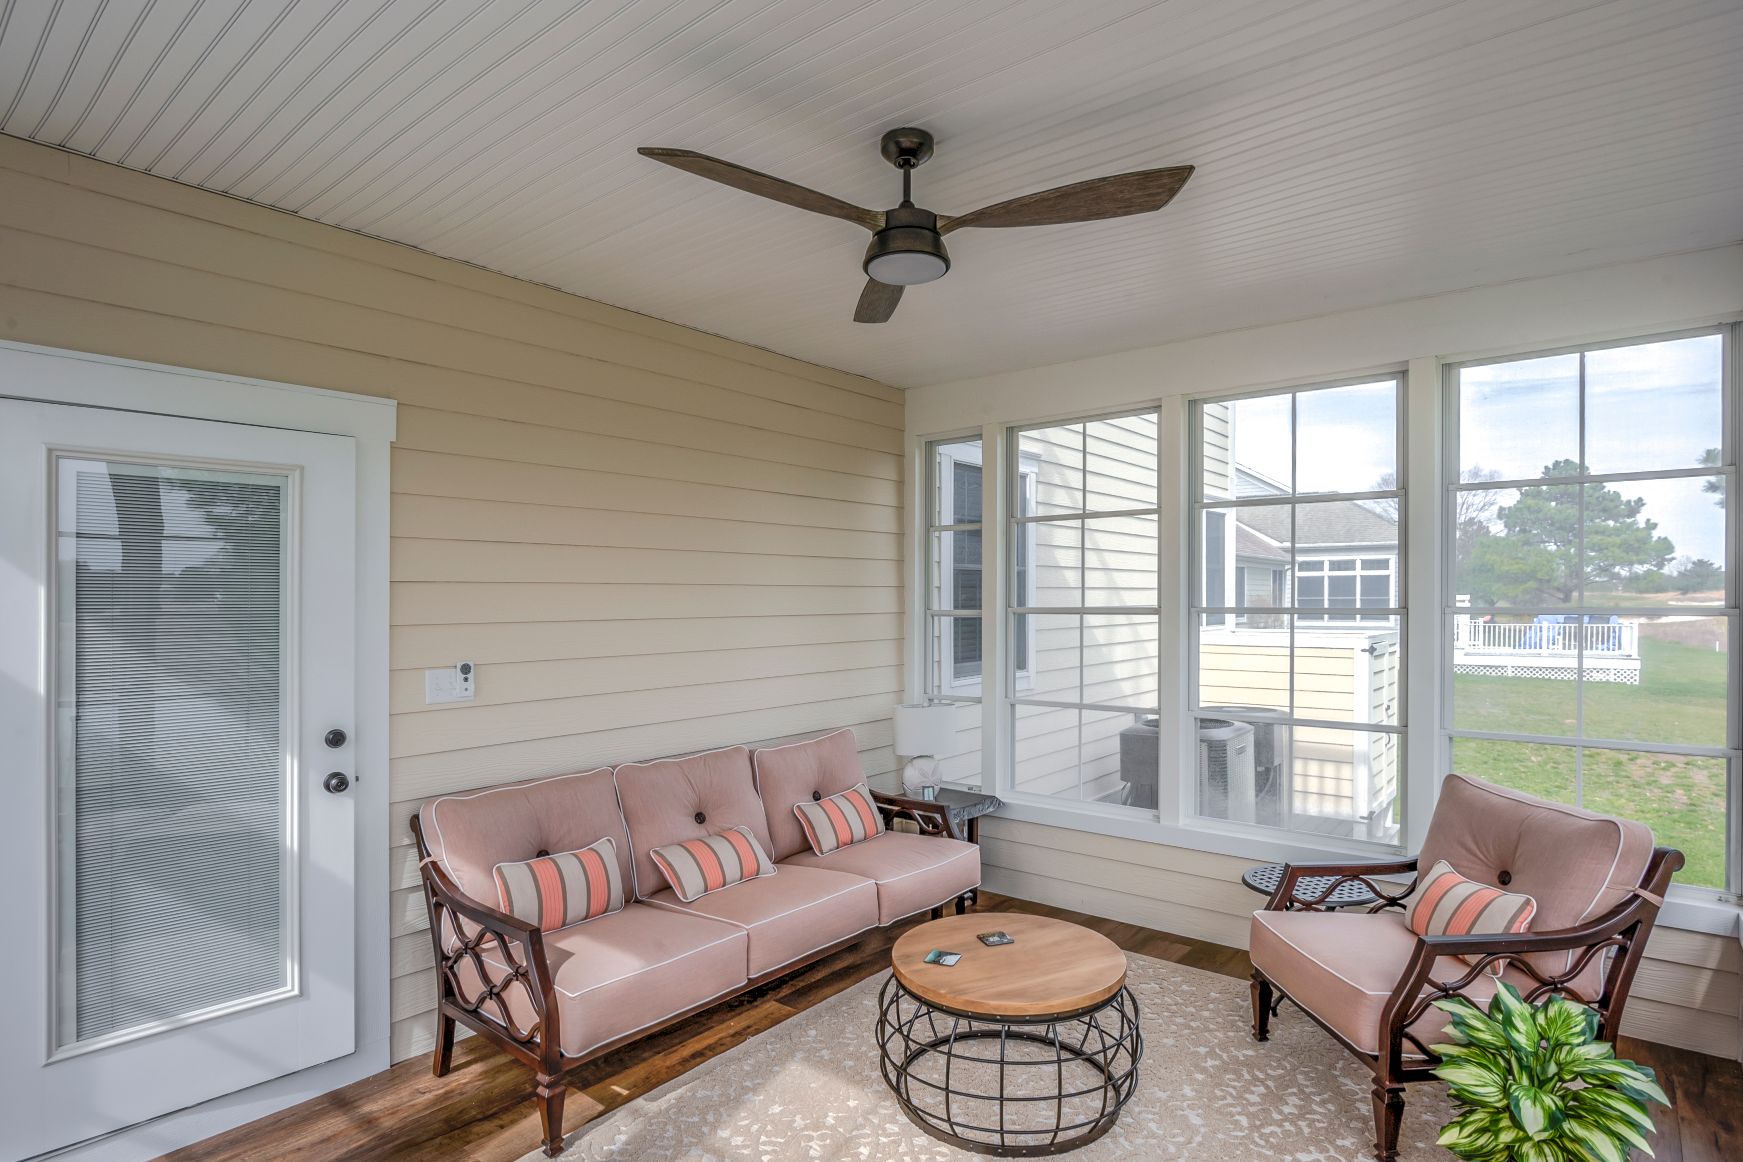 October Glory Exterior in Ocean View DE - Sunroom with Vintage Ceiling Fan and Round Coffee Table